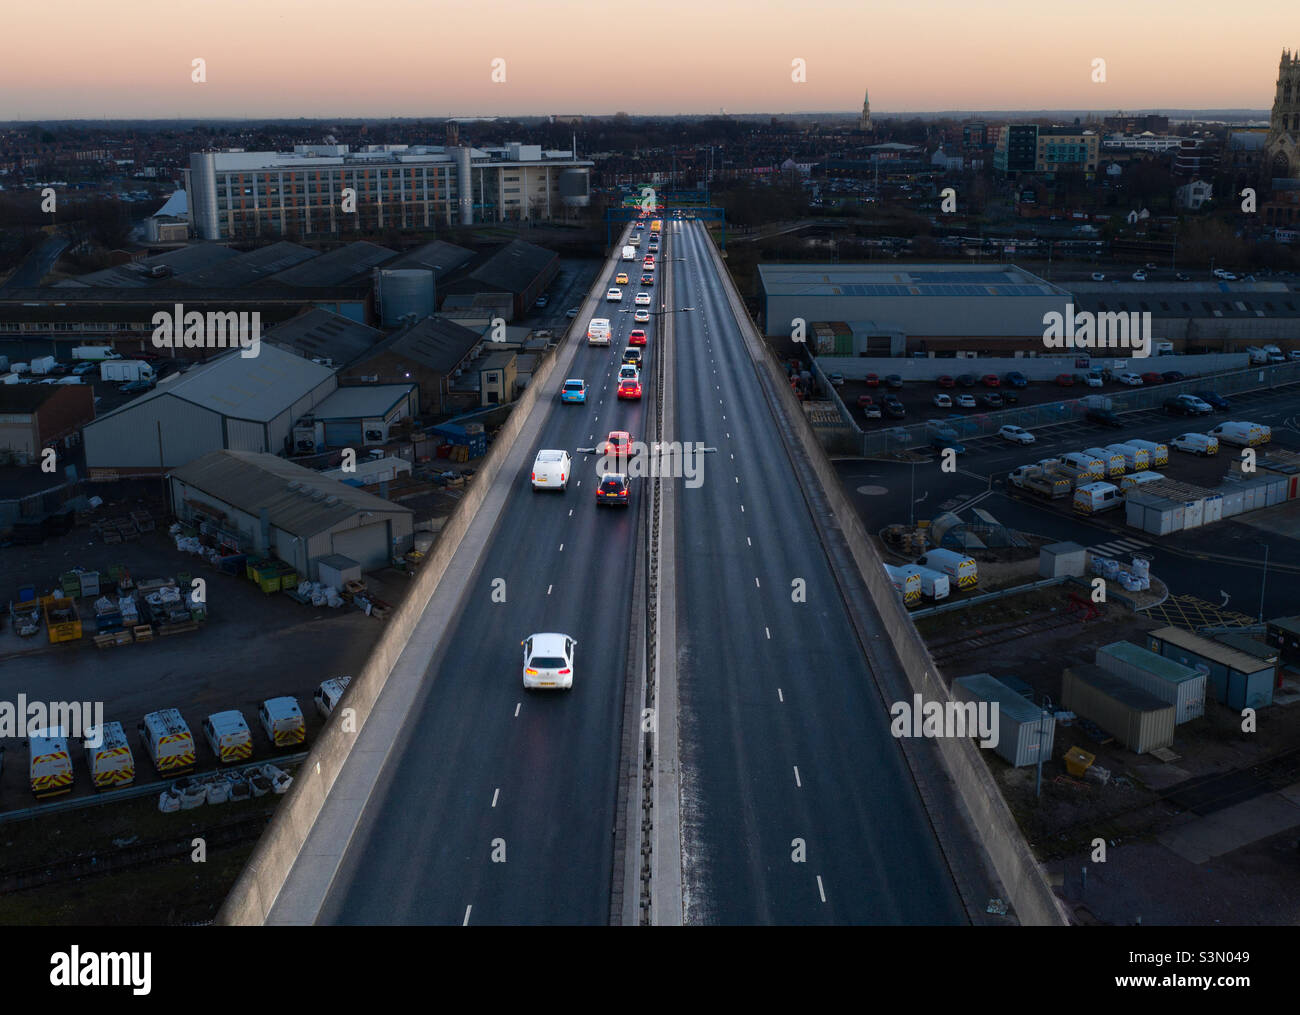 Aerial view of traffic driving into a city at night Stock Photo